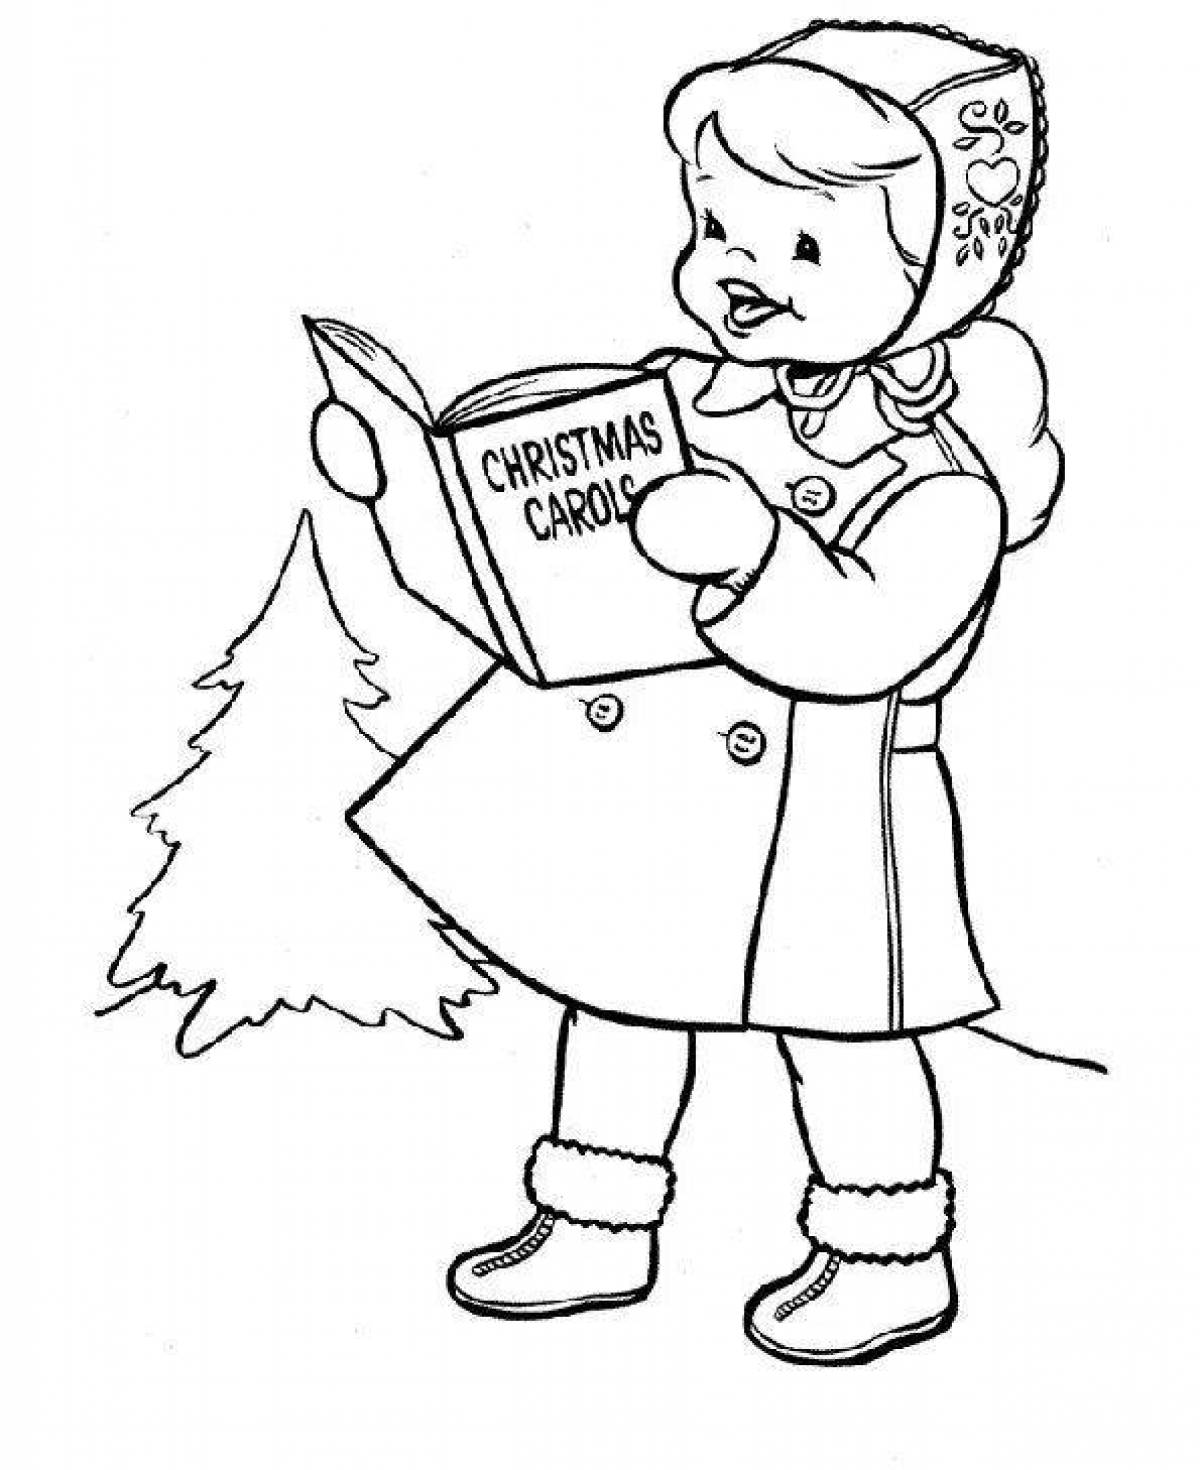 Bright Christmas coloring page